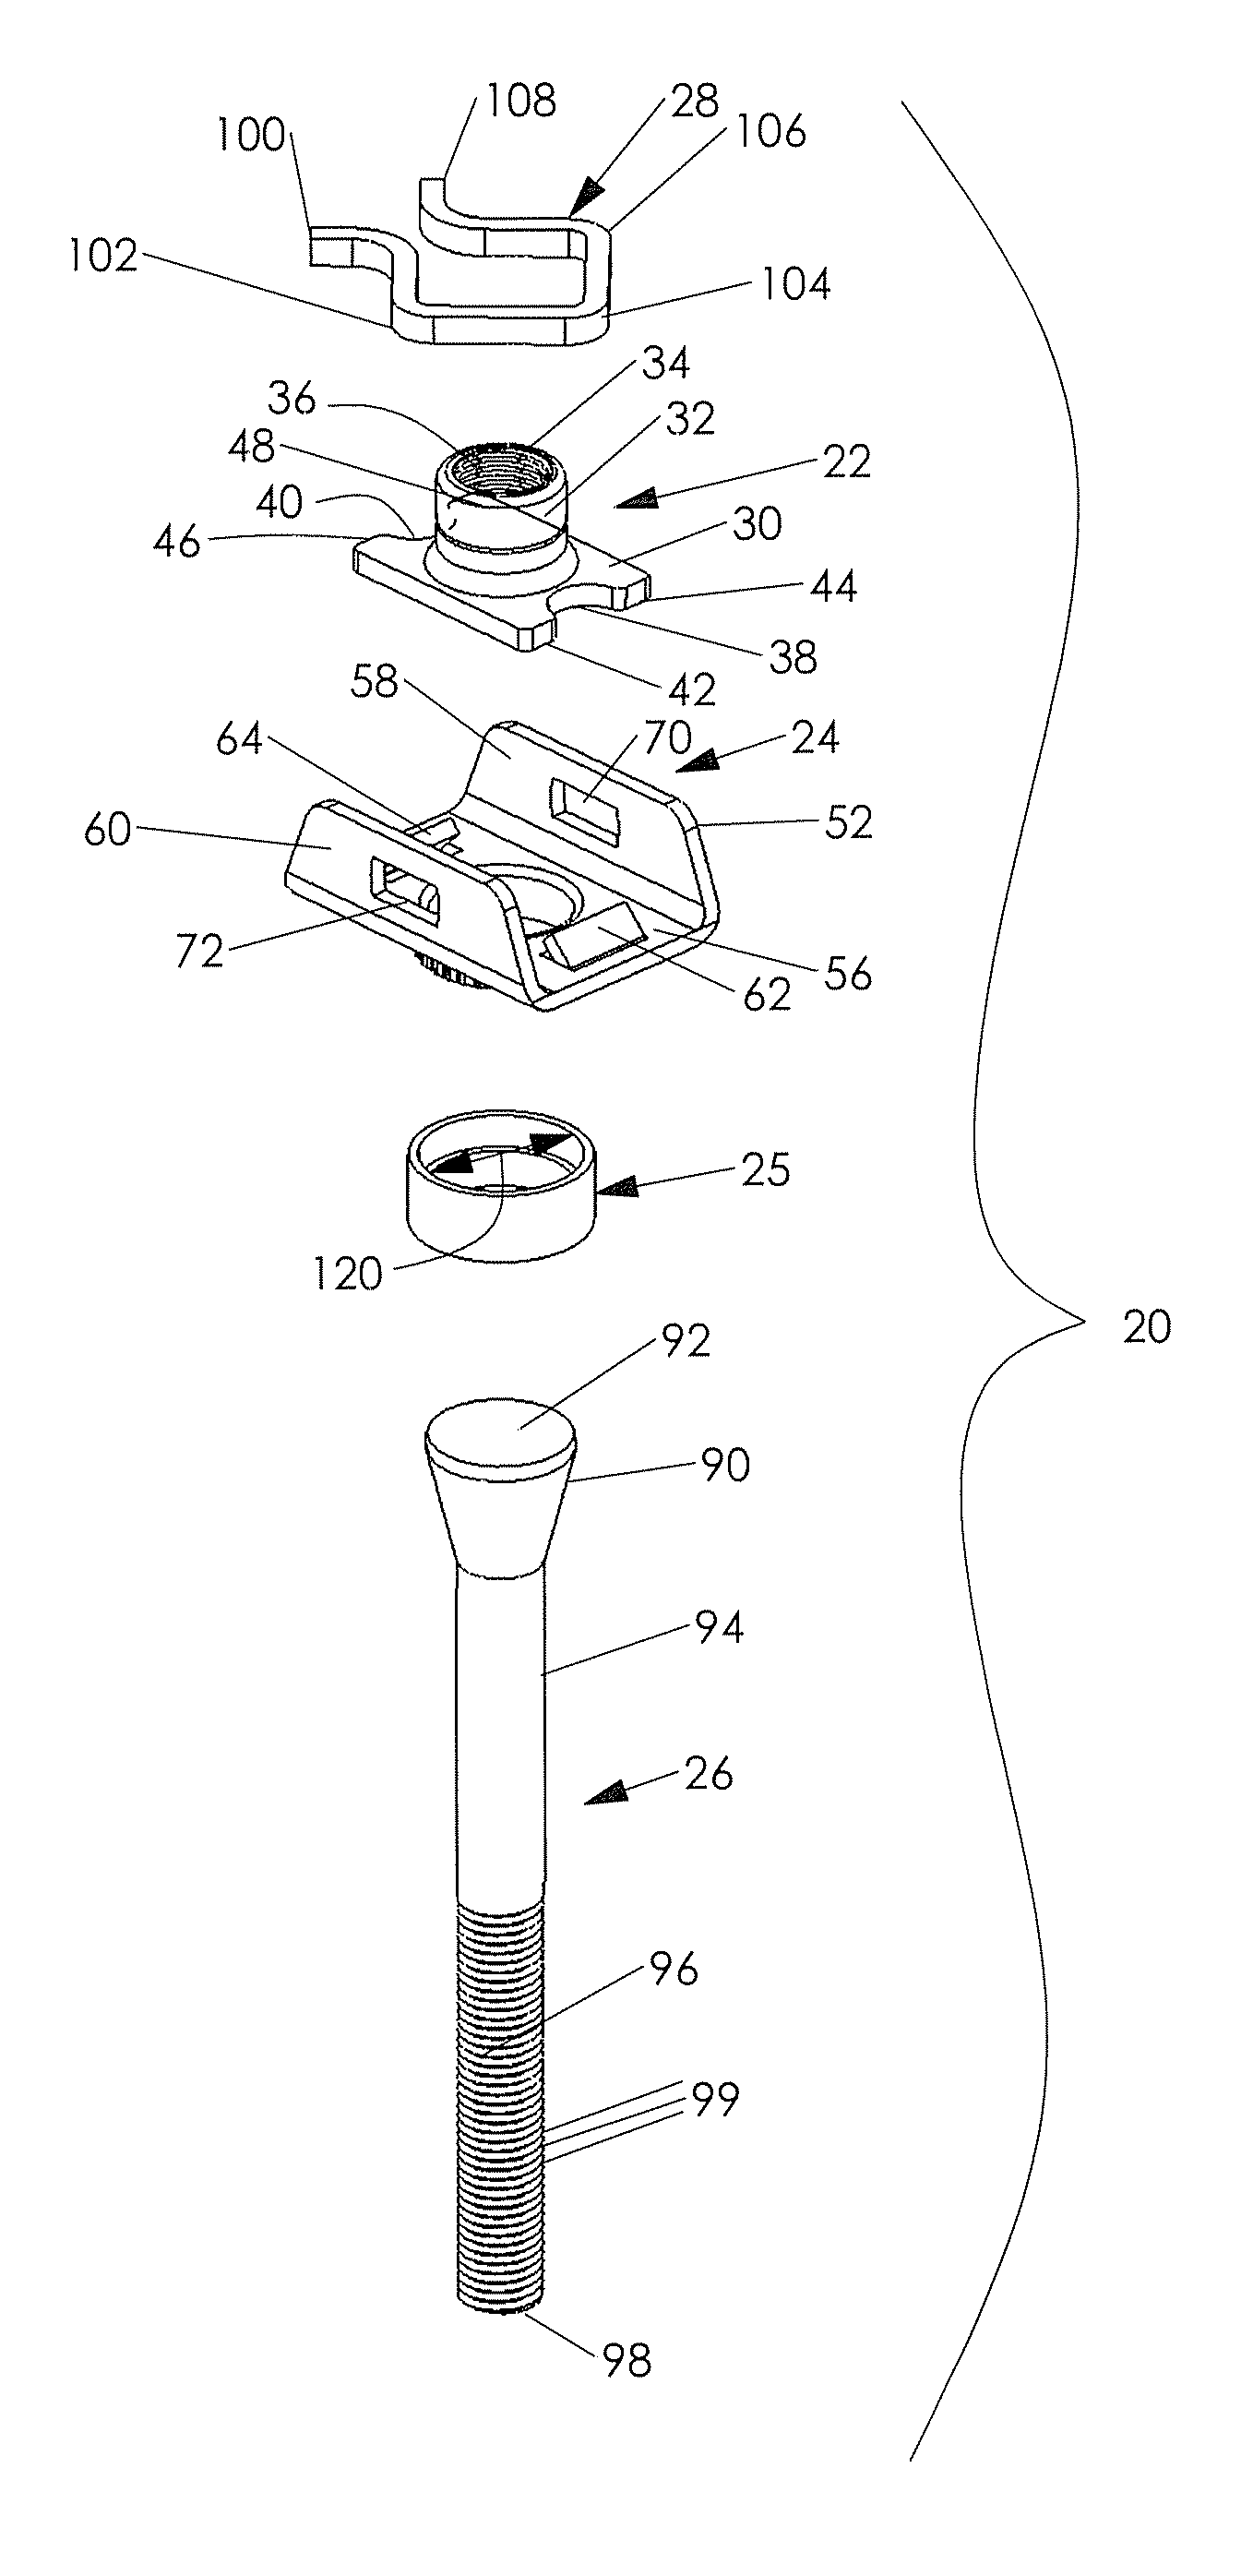 Nut plate fastener assembly for composite materials